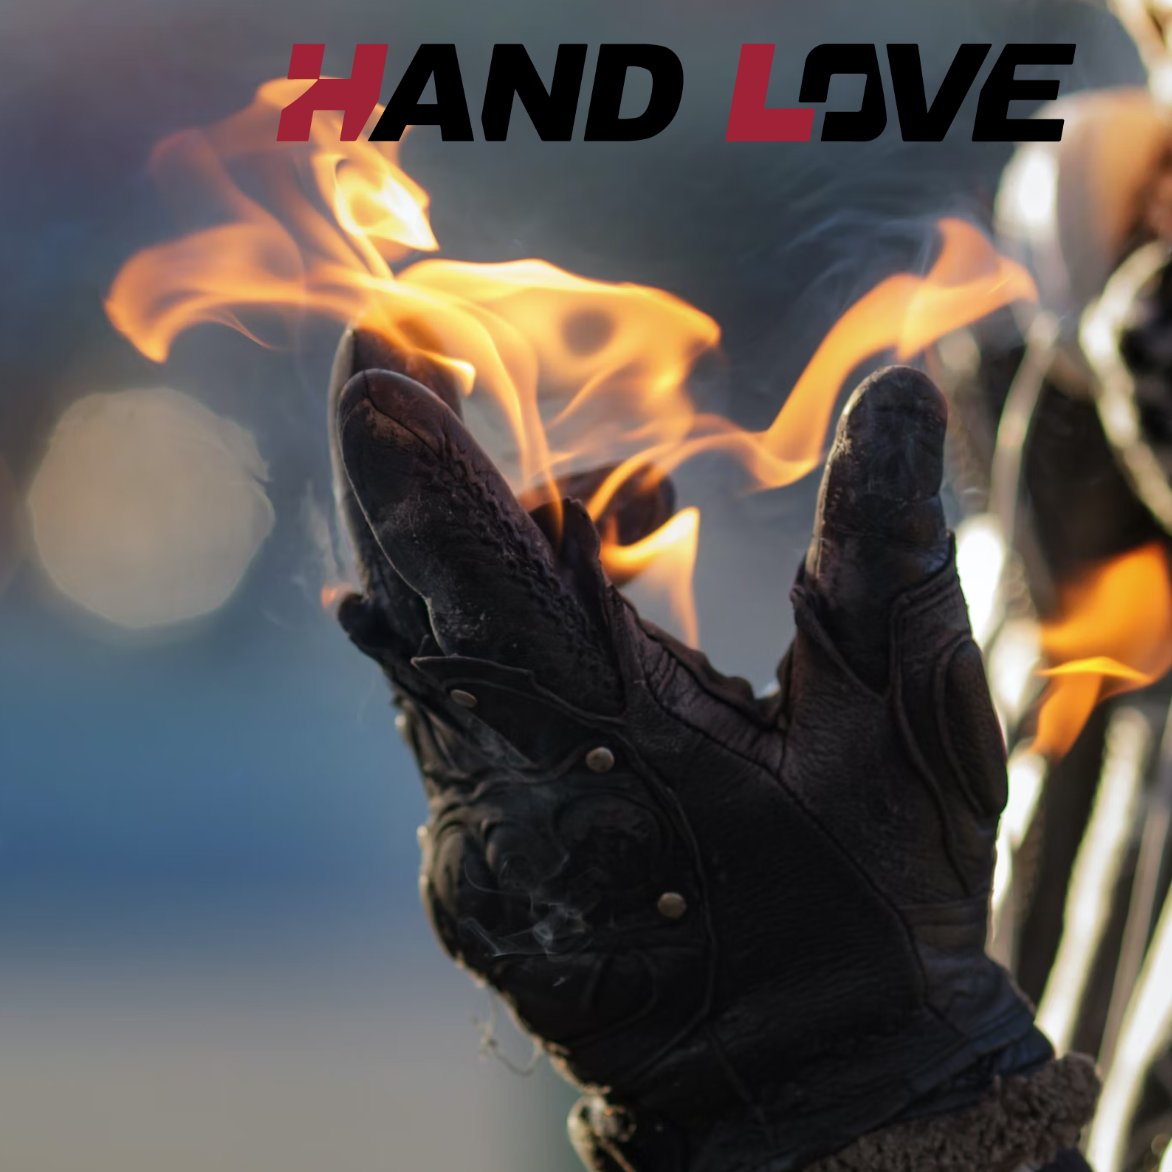 🔥 Rising Above the Flames in Style 🔥#safetygloves #safety #safetyfirst #reduce #reuse #renewable #designer #workgloves #anticut #antiimpact #supplier #industry #oem #handlove #FireResistant #Fireproof